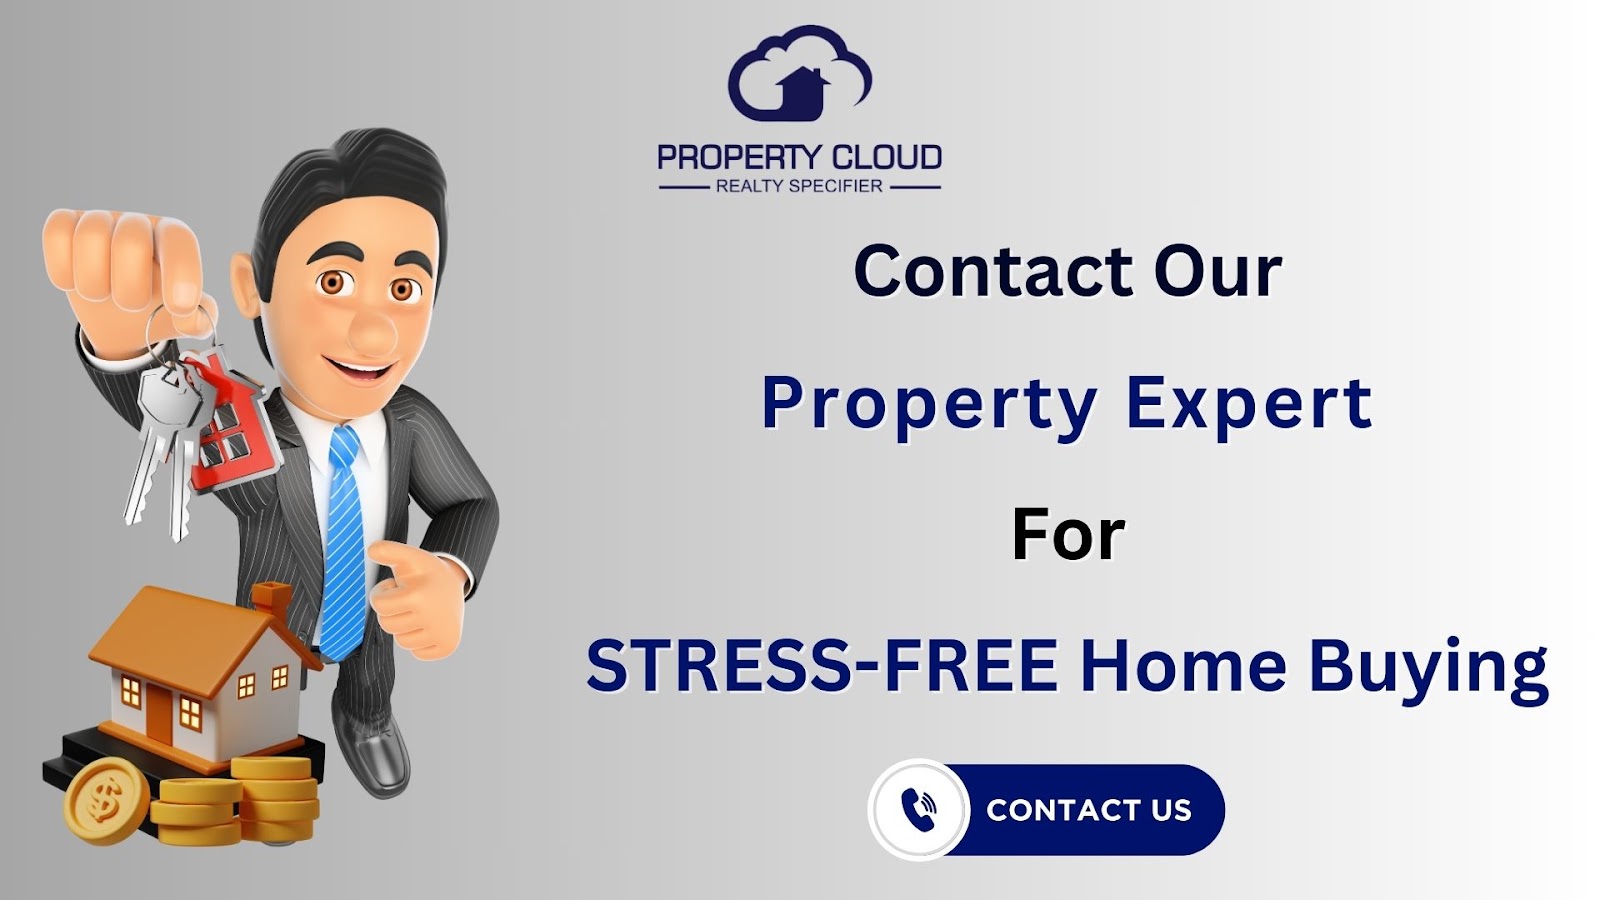 Contact PropertyCloud to get the best advice related to any queries about real estate.